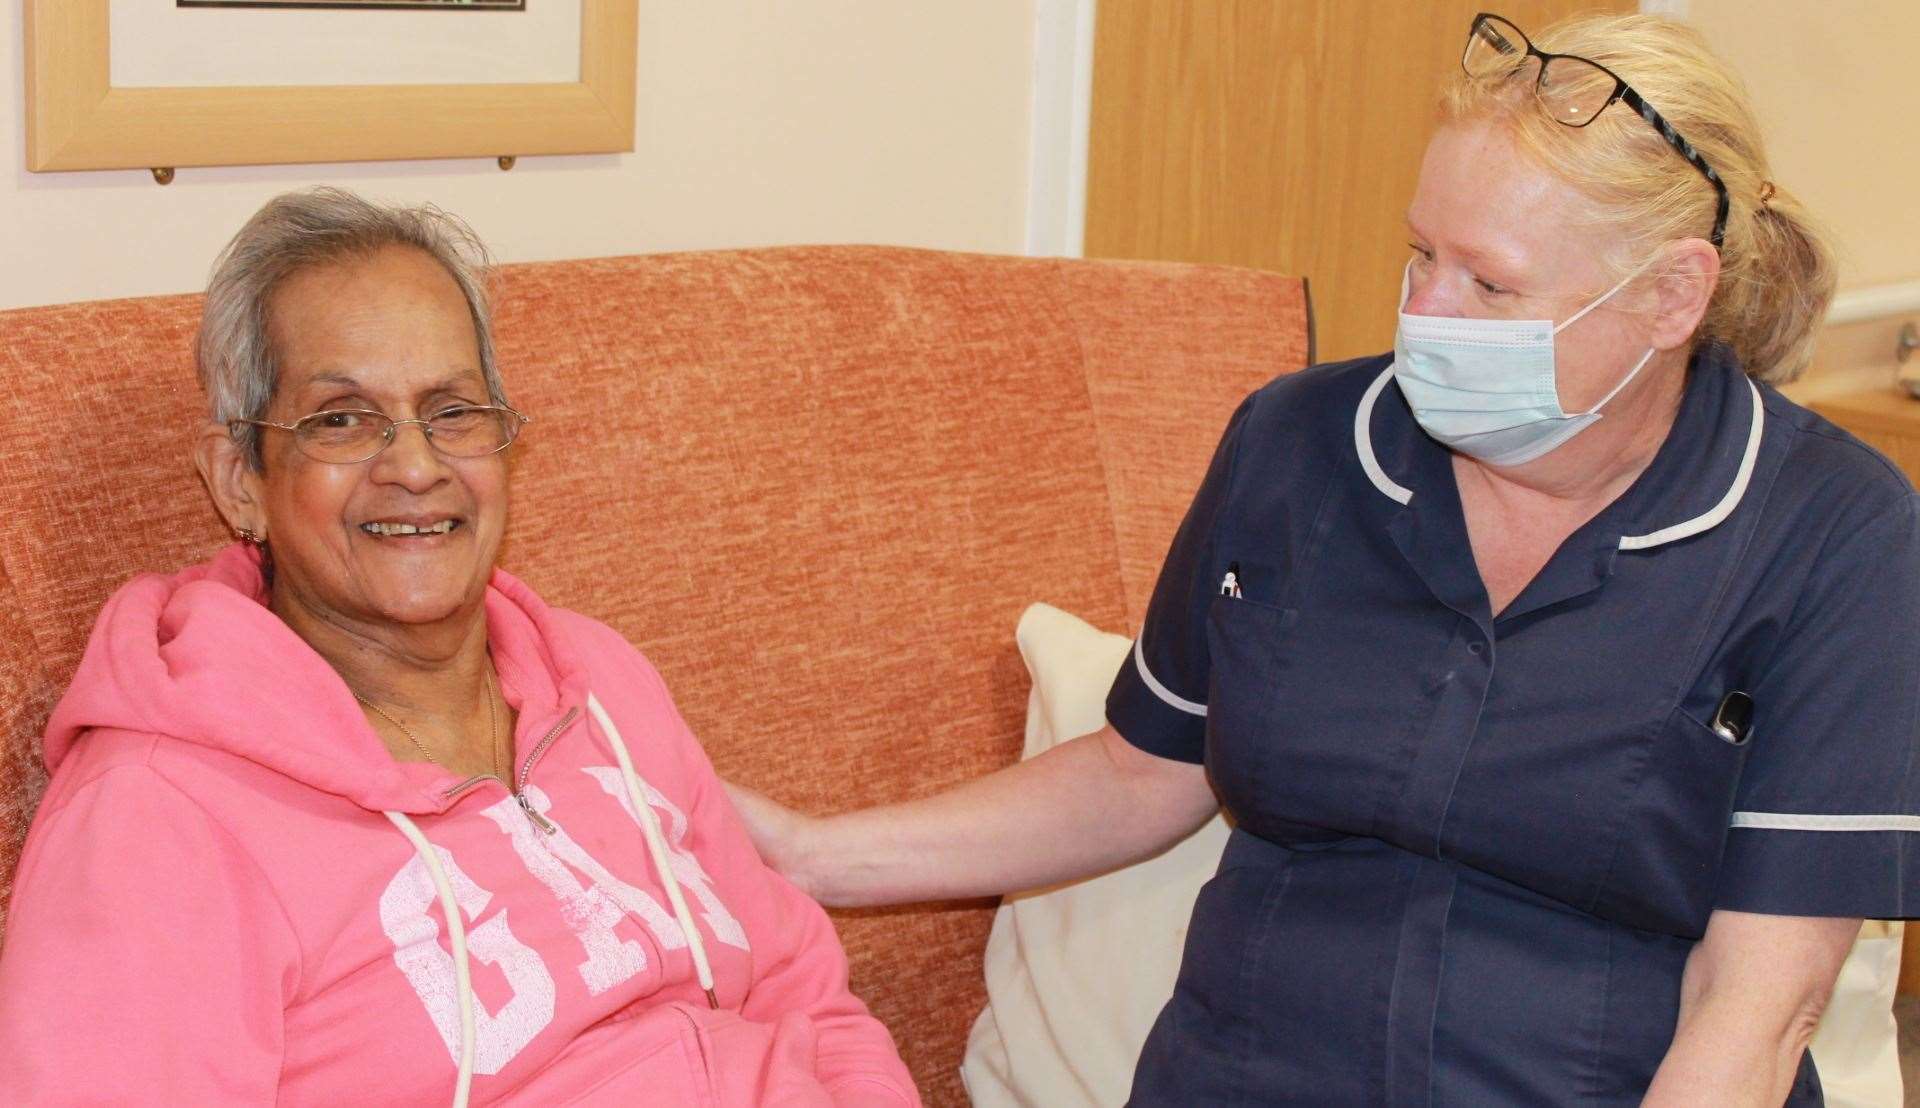 This care home was designed with the best practice dementia care in mind